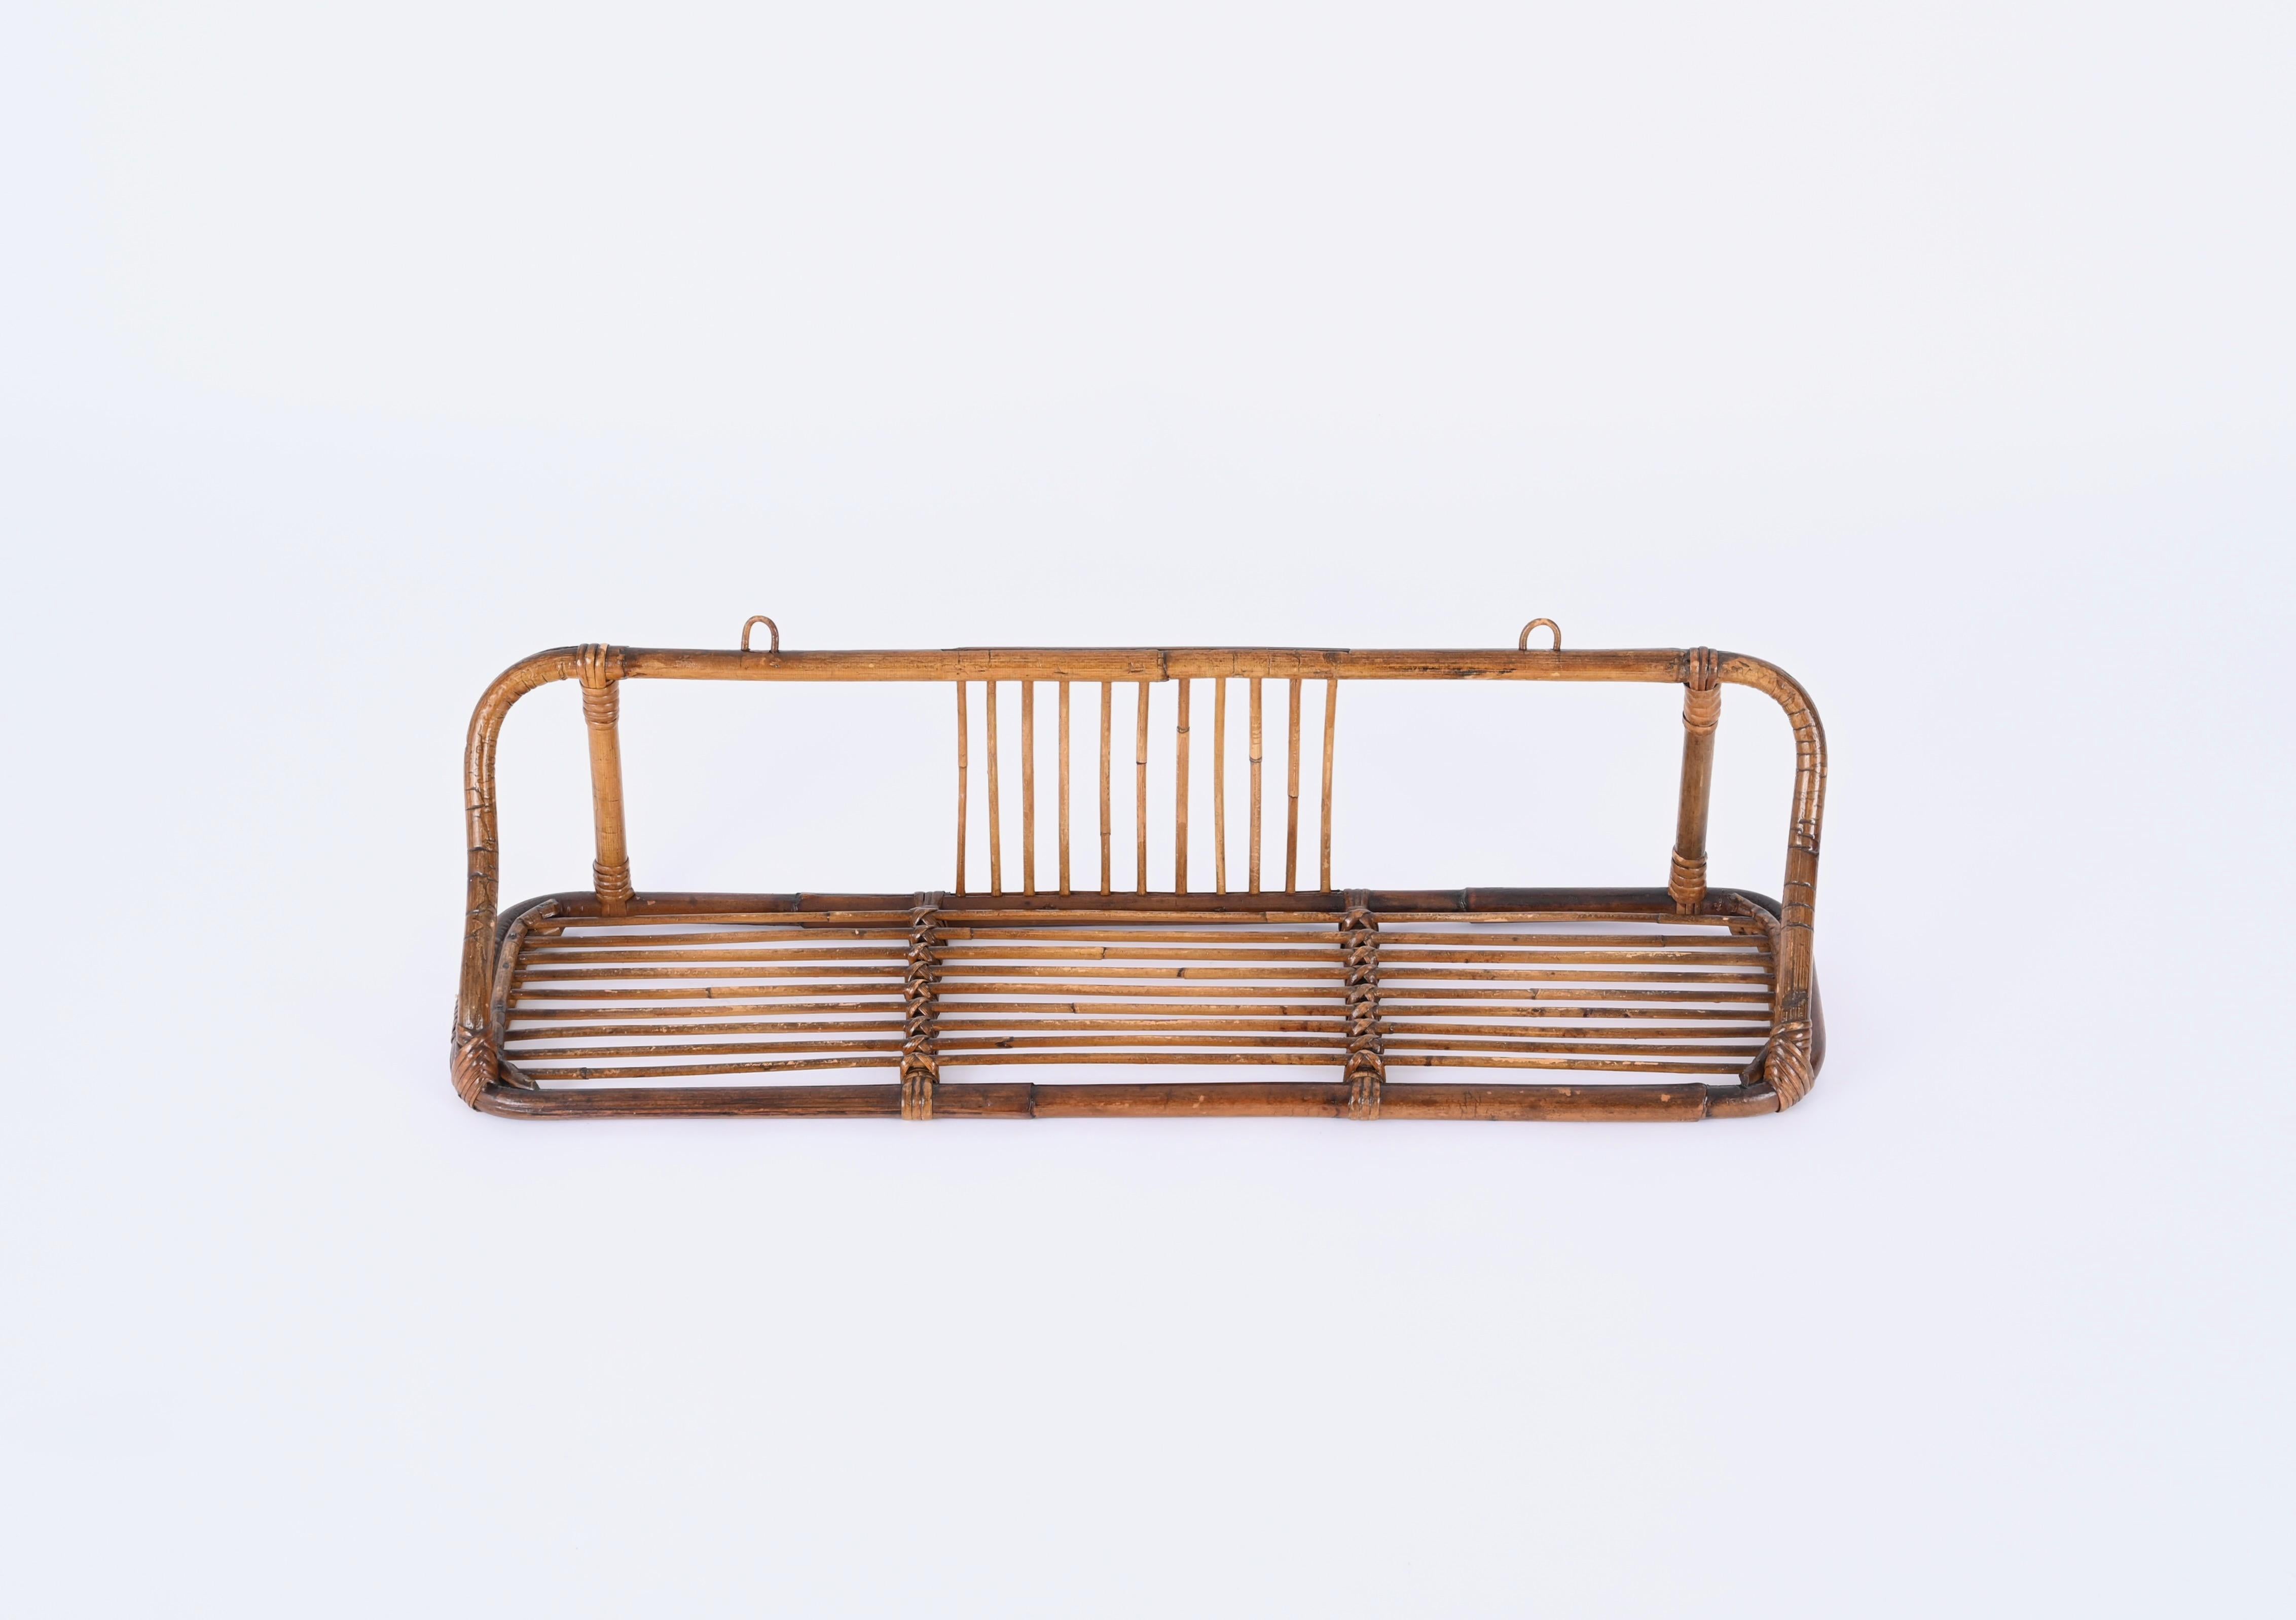  French Riviera Mid-Century Wall Shelf in Rattan and Bamboo, Italy, 1960s For Sale 7